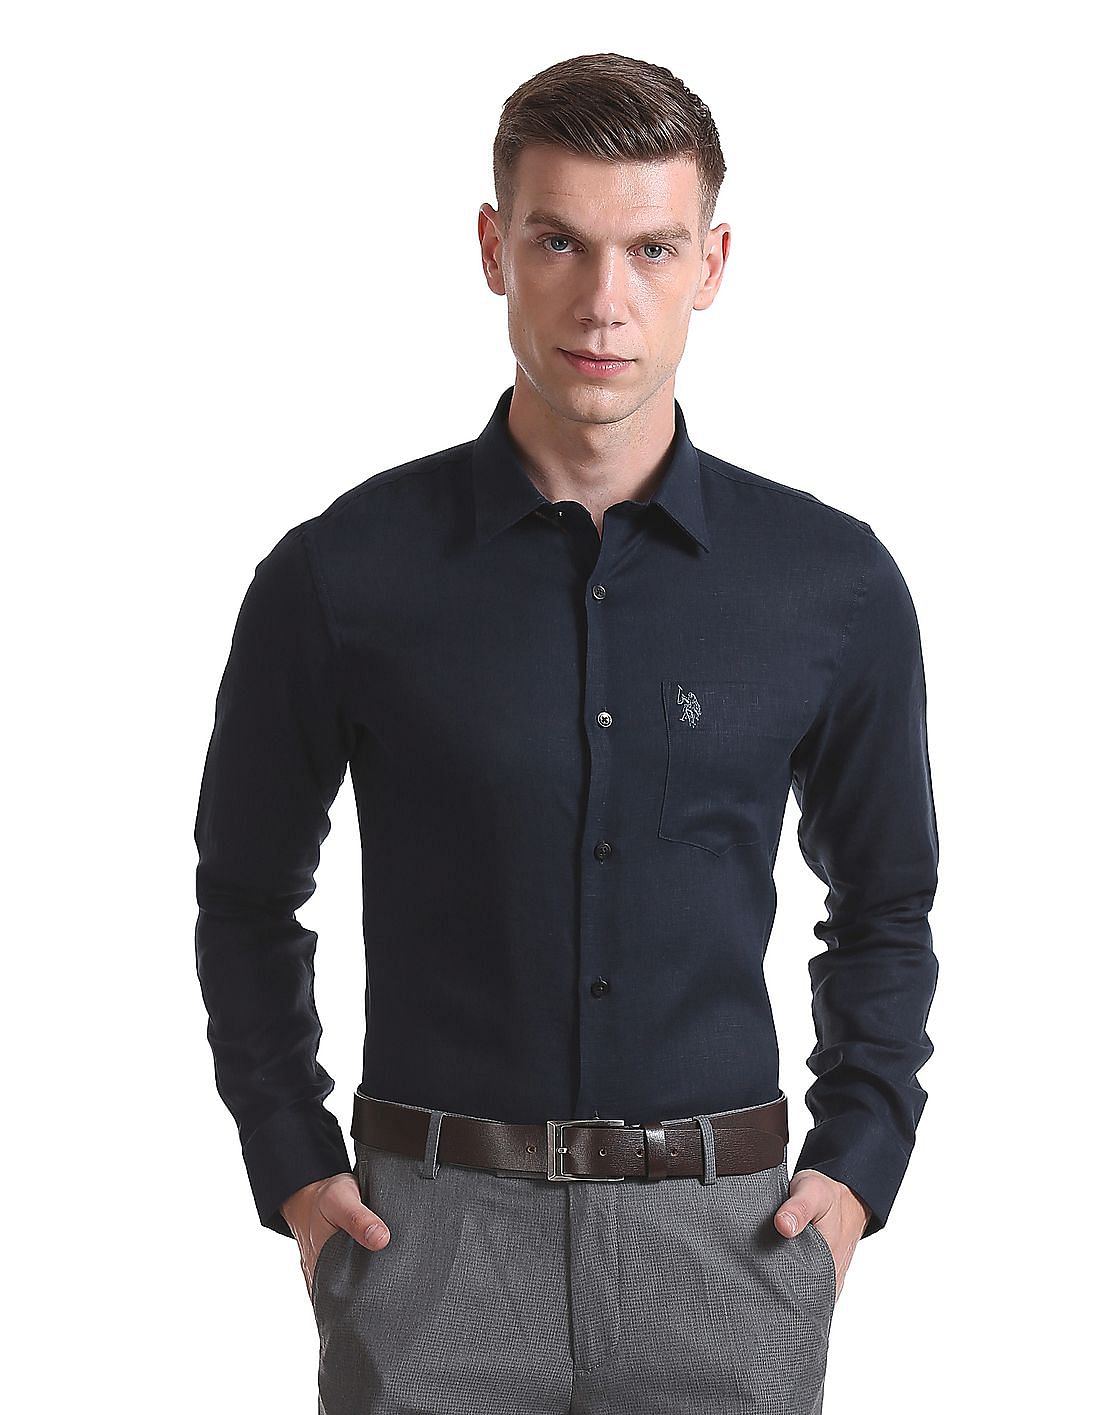 Buy Men French Placket Linen Shirt online at NNNOW.com